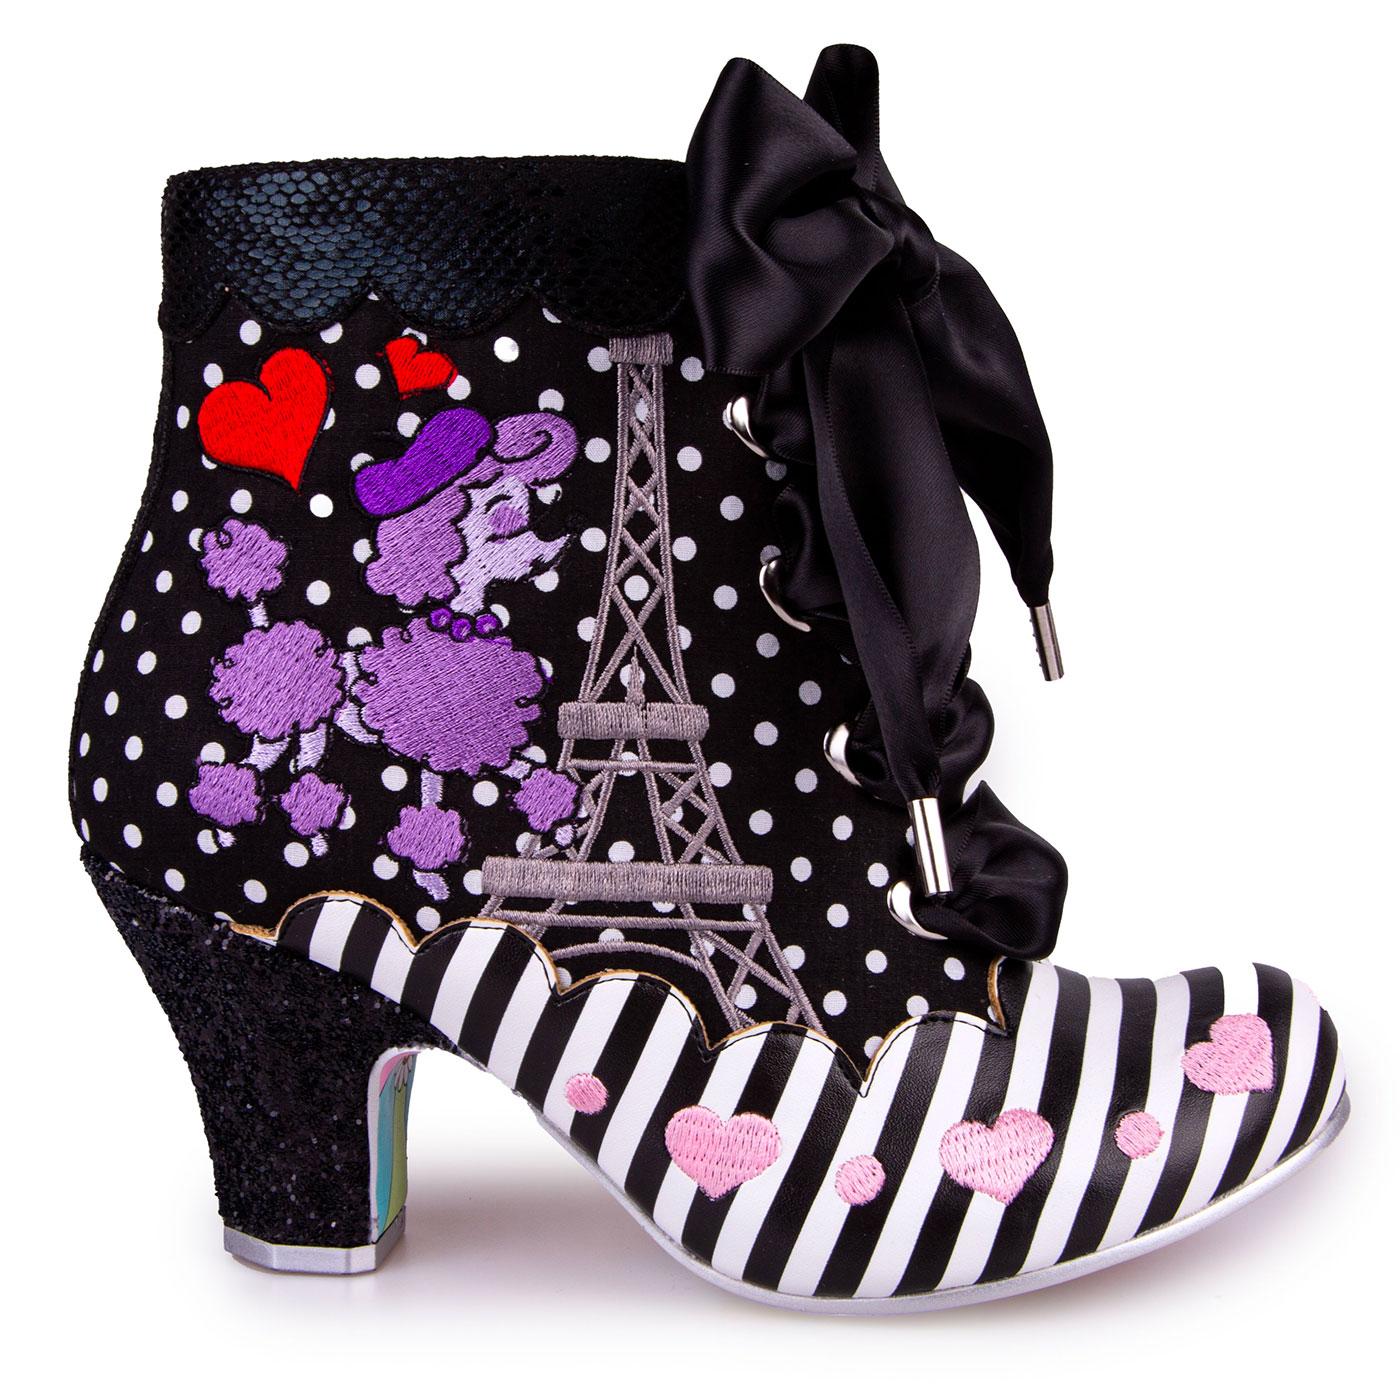 Paris For Two IRREGULAR CHOICE Poodle Heel Boots Black